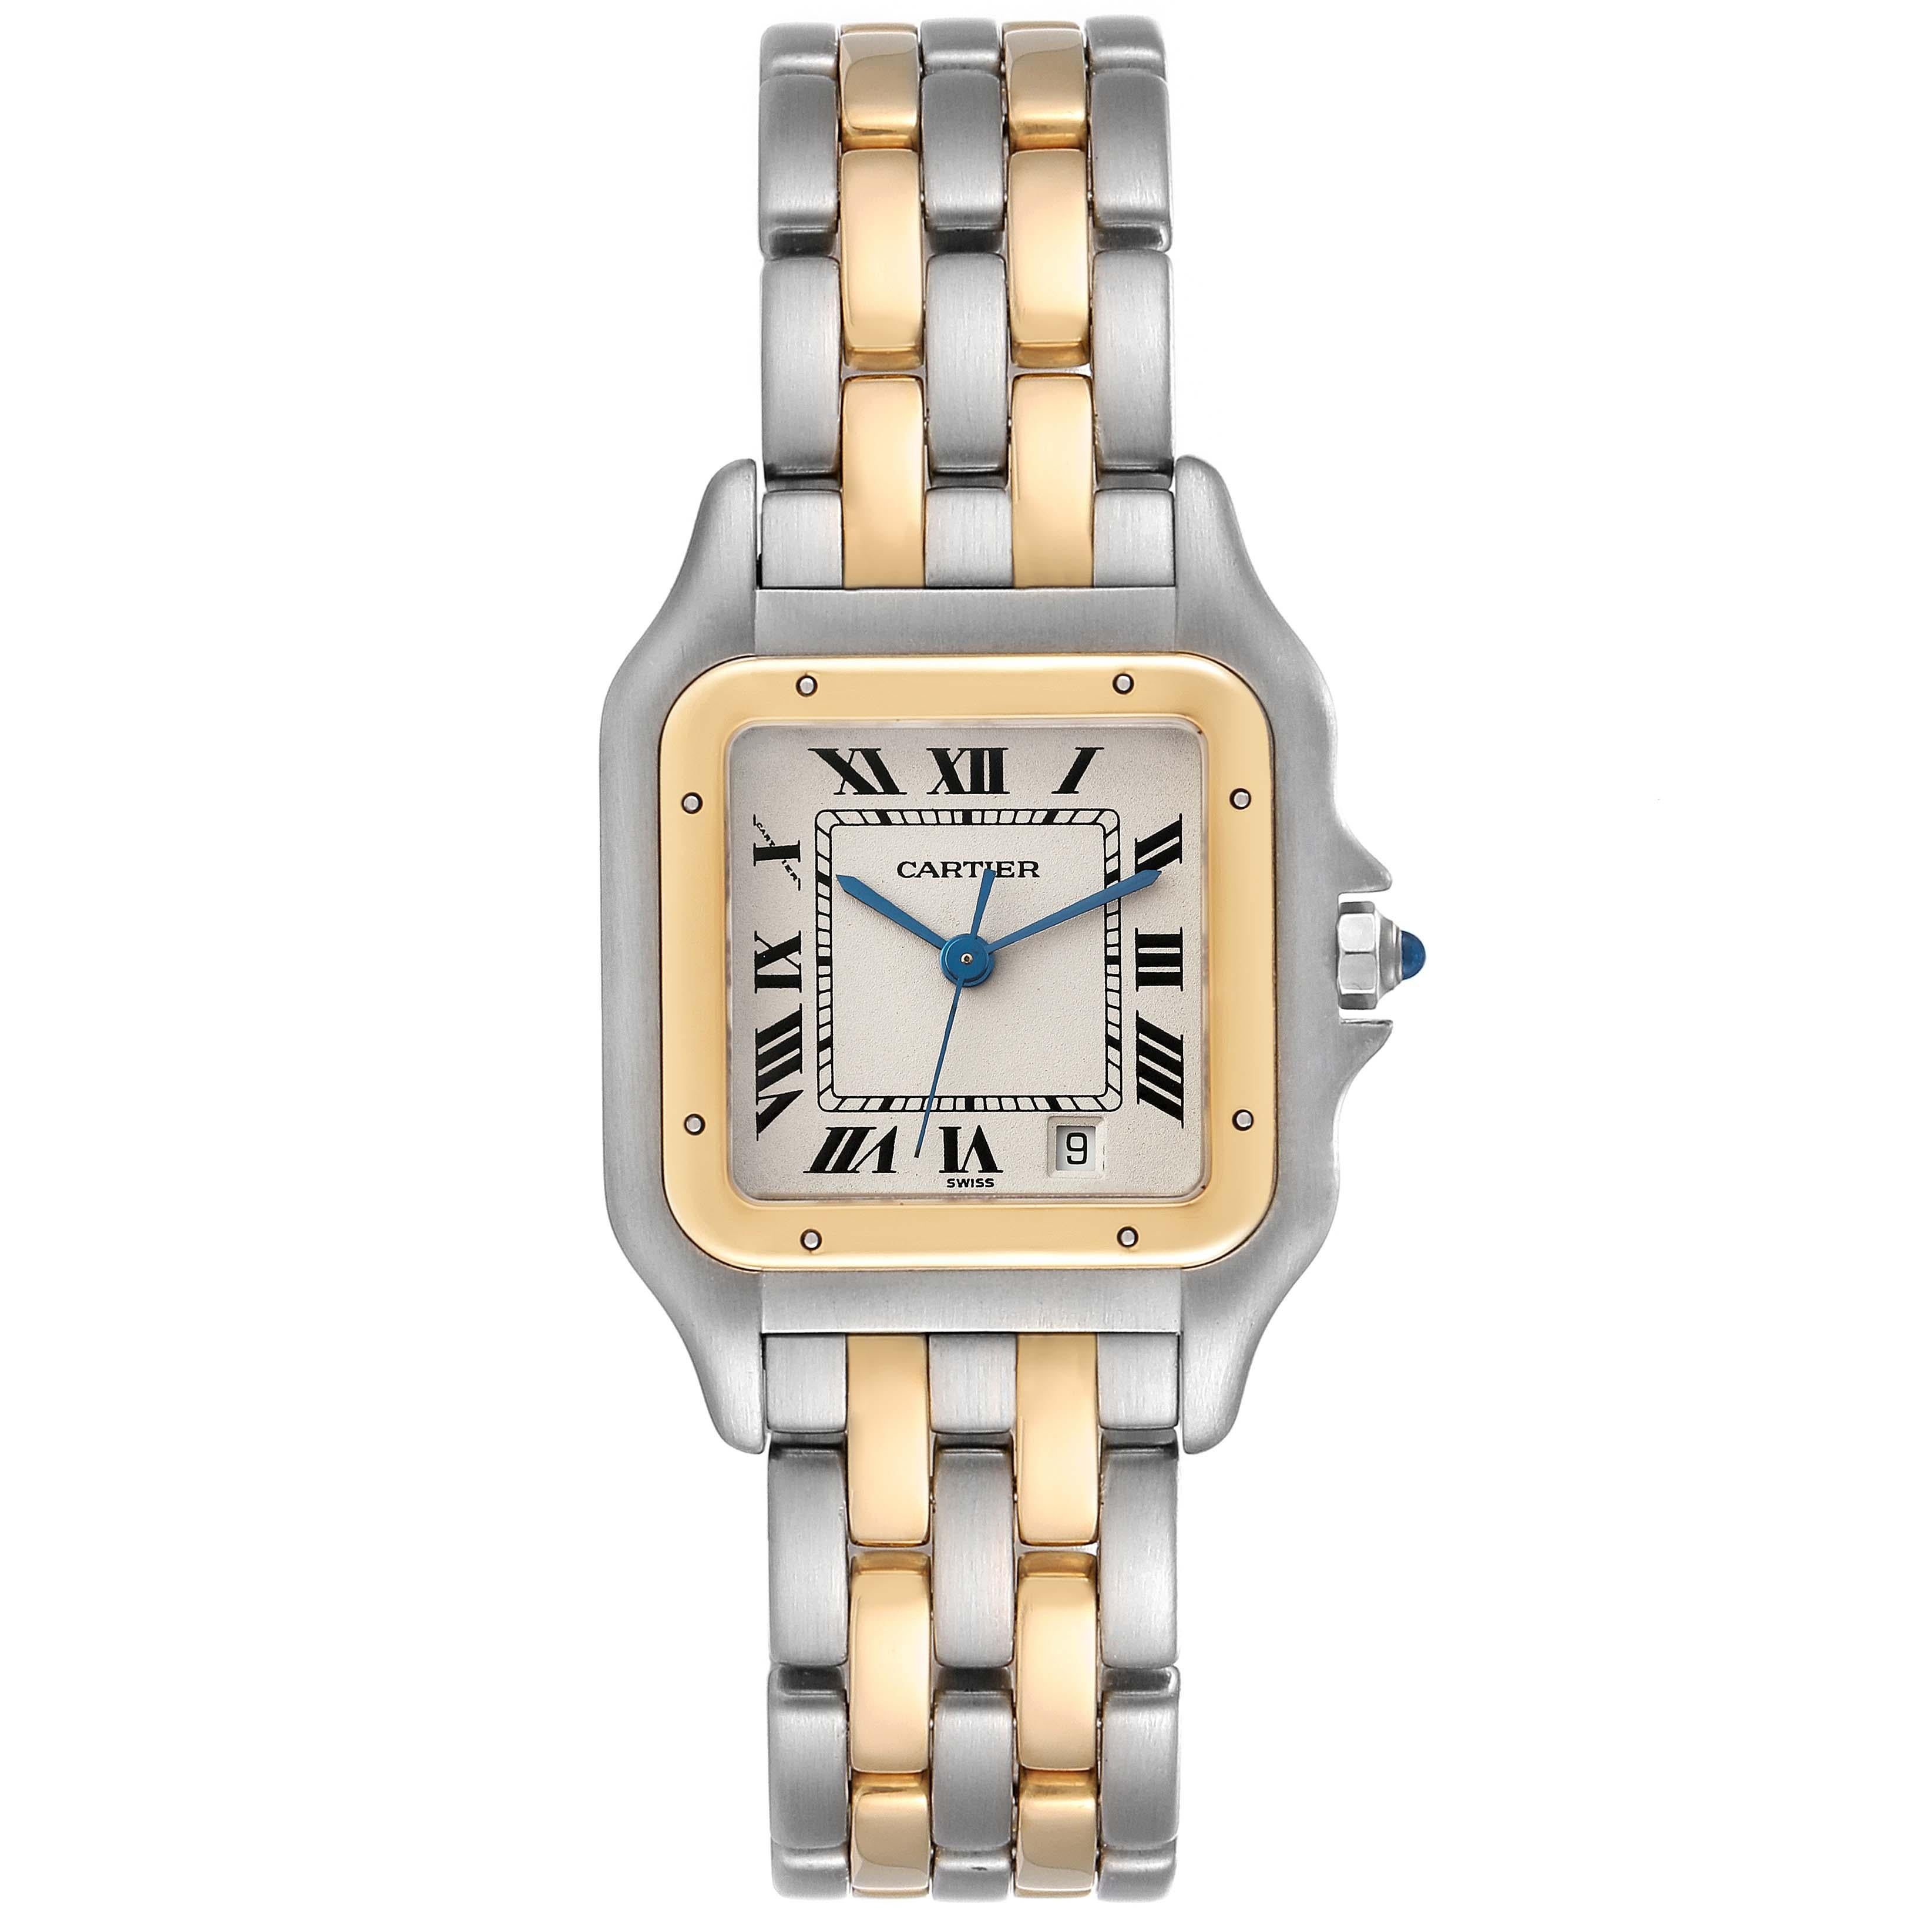 Cartier Panthere Midsize Steel Yellow Gold Two Row Ladies Watch W25028B8. Quartz movement. Stainless steel and 18k yellow gold case 26.0 x 36.0 mm. Octagonal crown set with the blue spinel cabochon. . Scratch resistant sapphire crystal. Silver dial